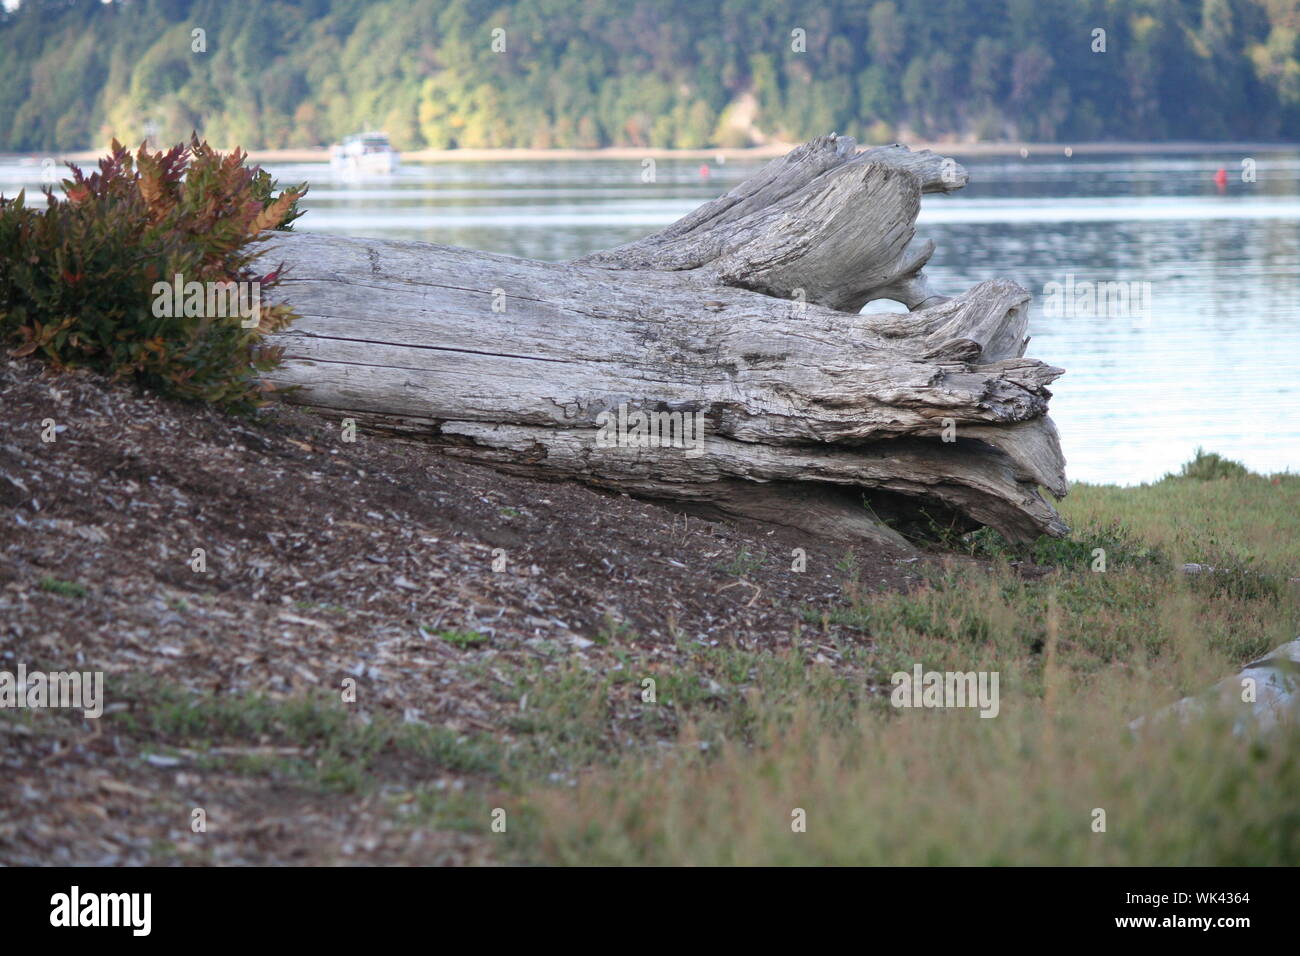 View Of Tree Trunk In Water Stock Photo